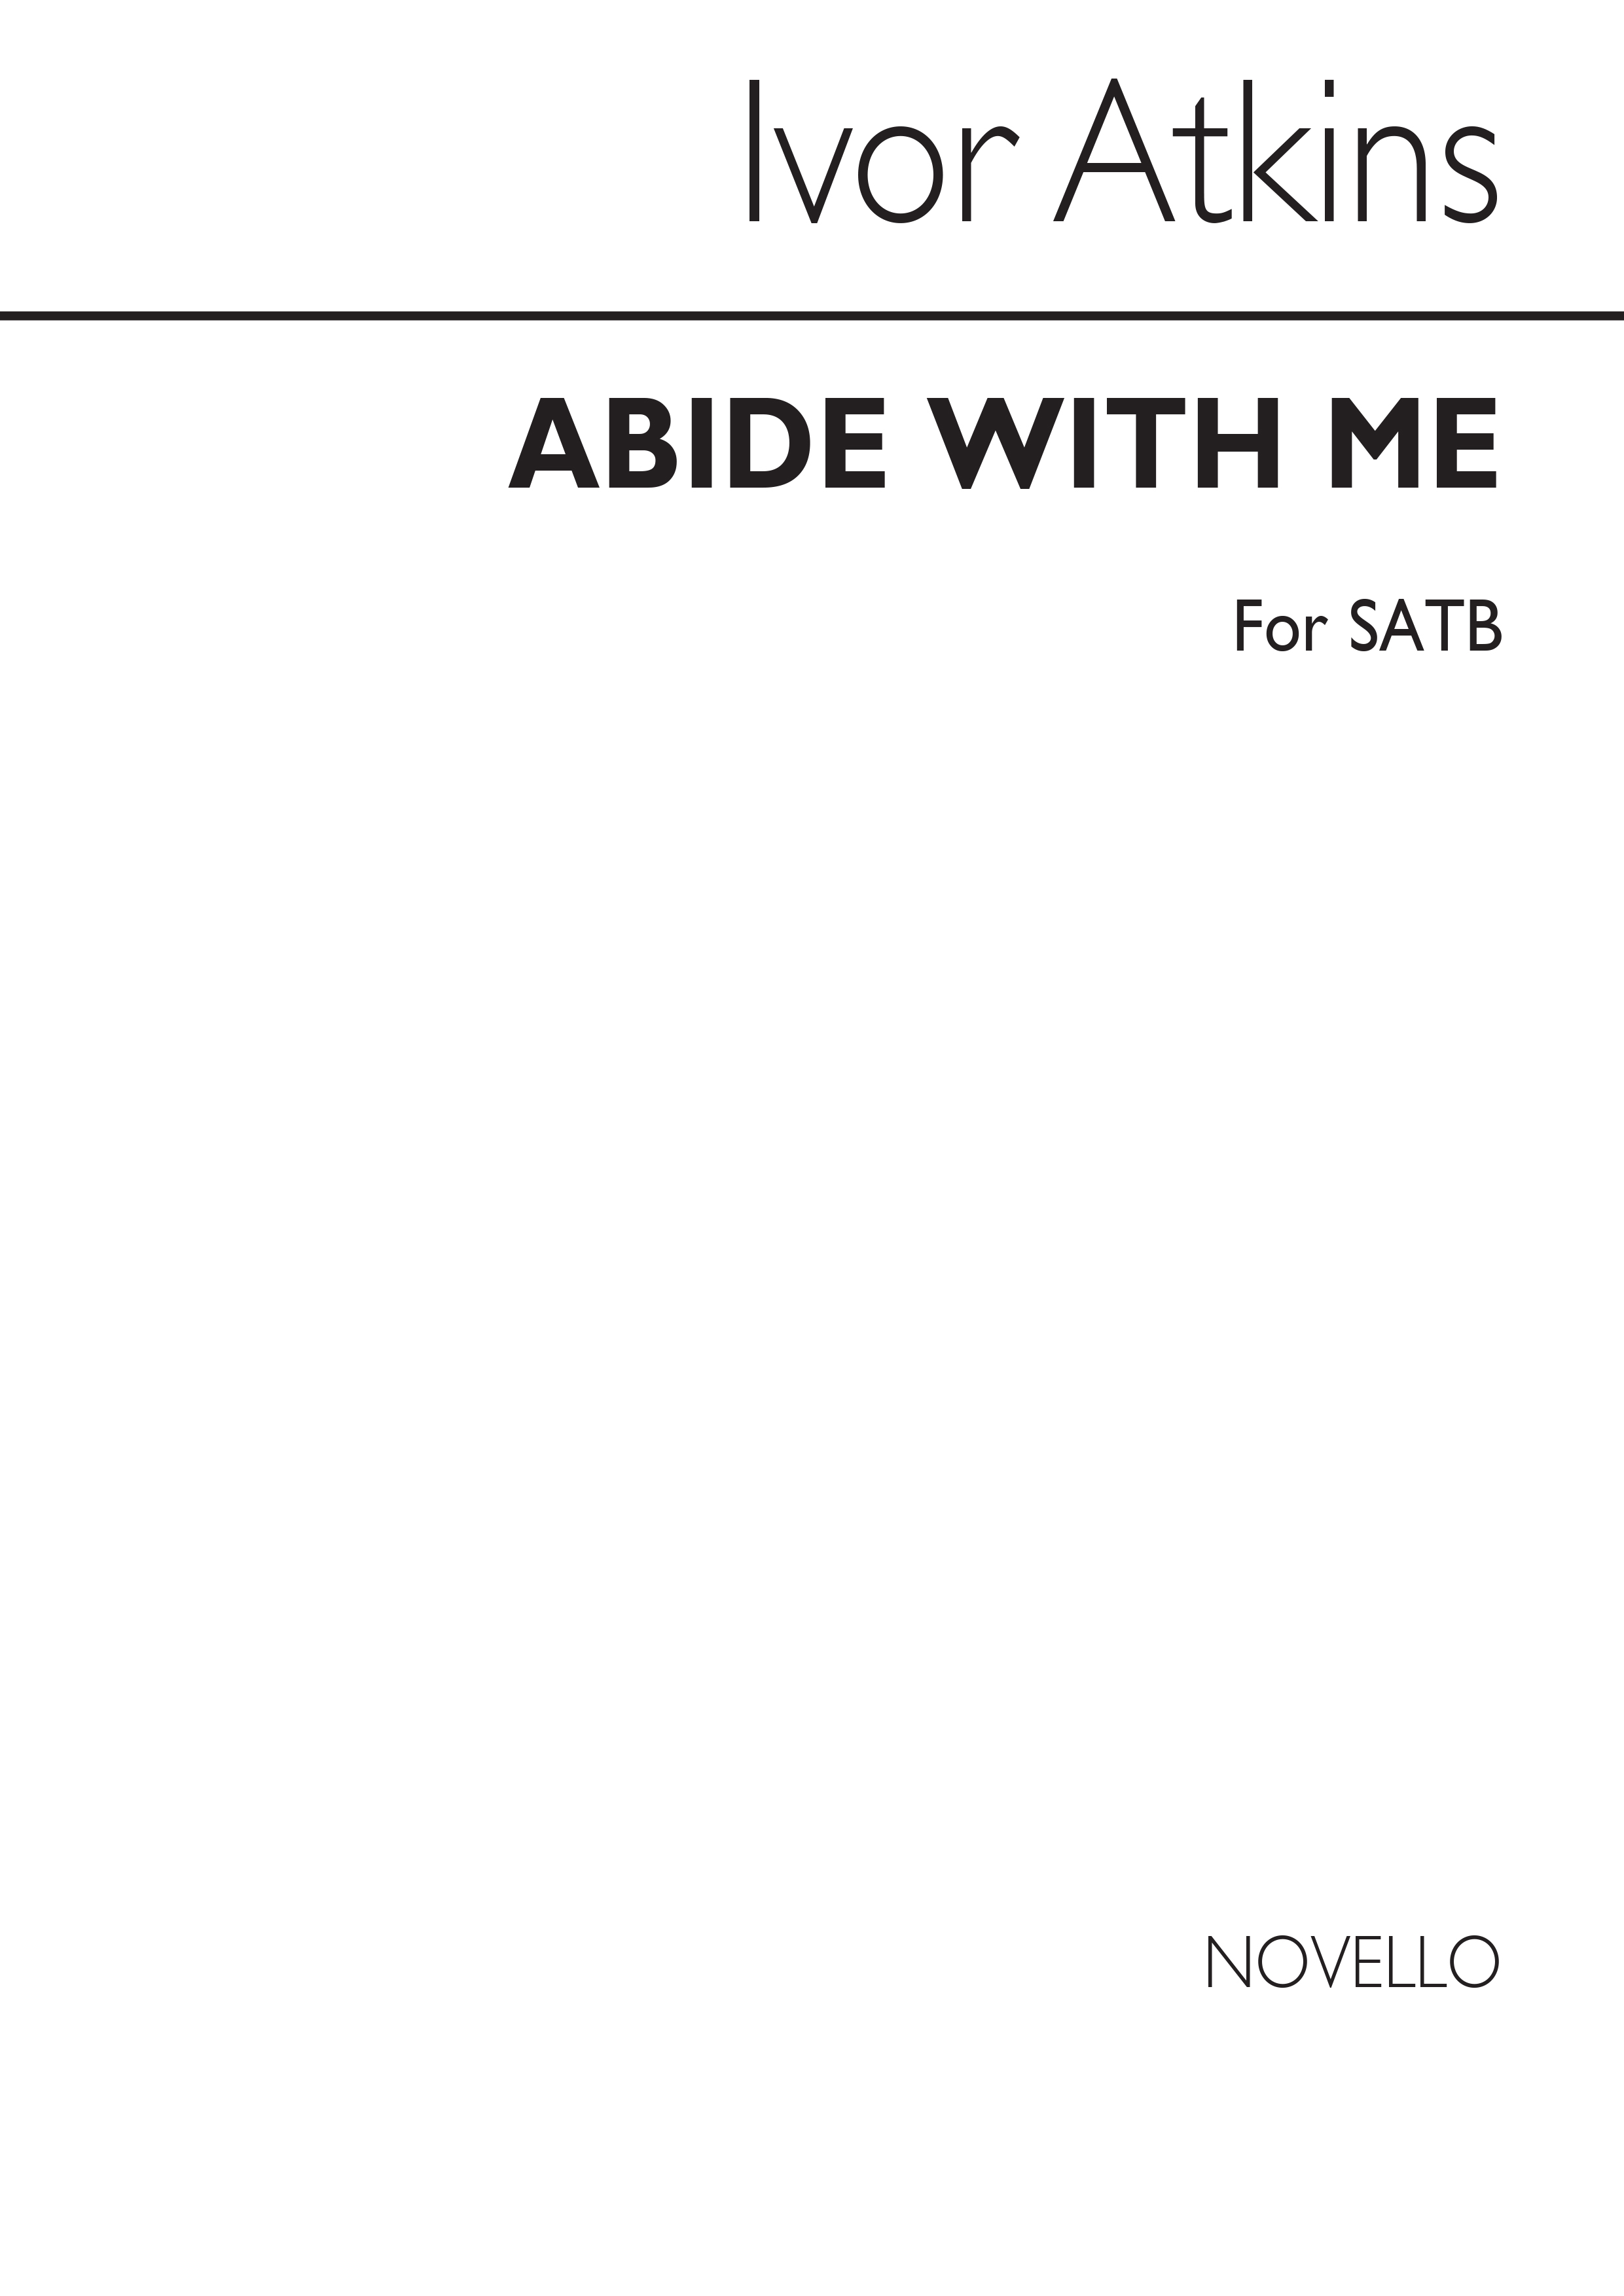 Atkins: Abide With Me for SATB Chorus with Organ Accompaniment